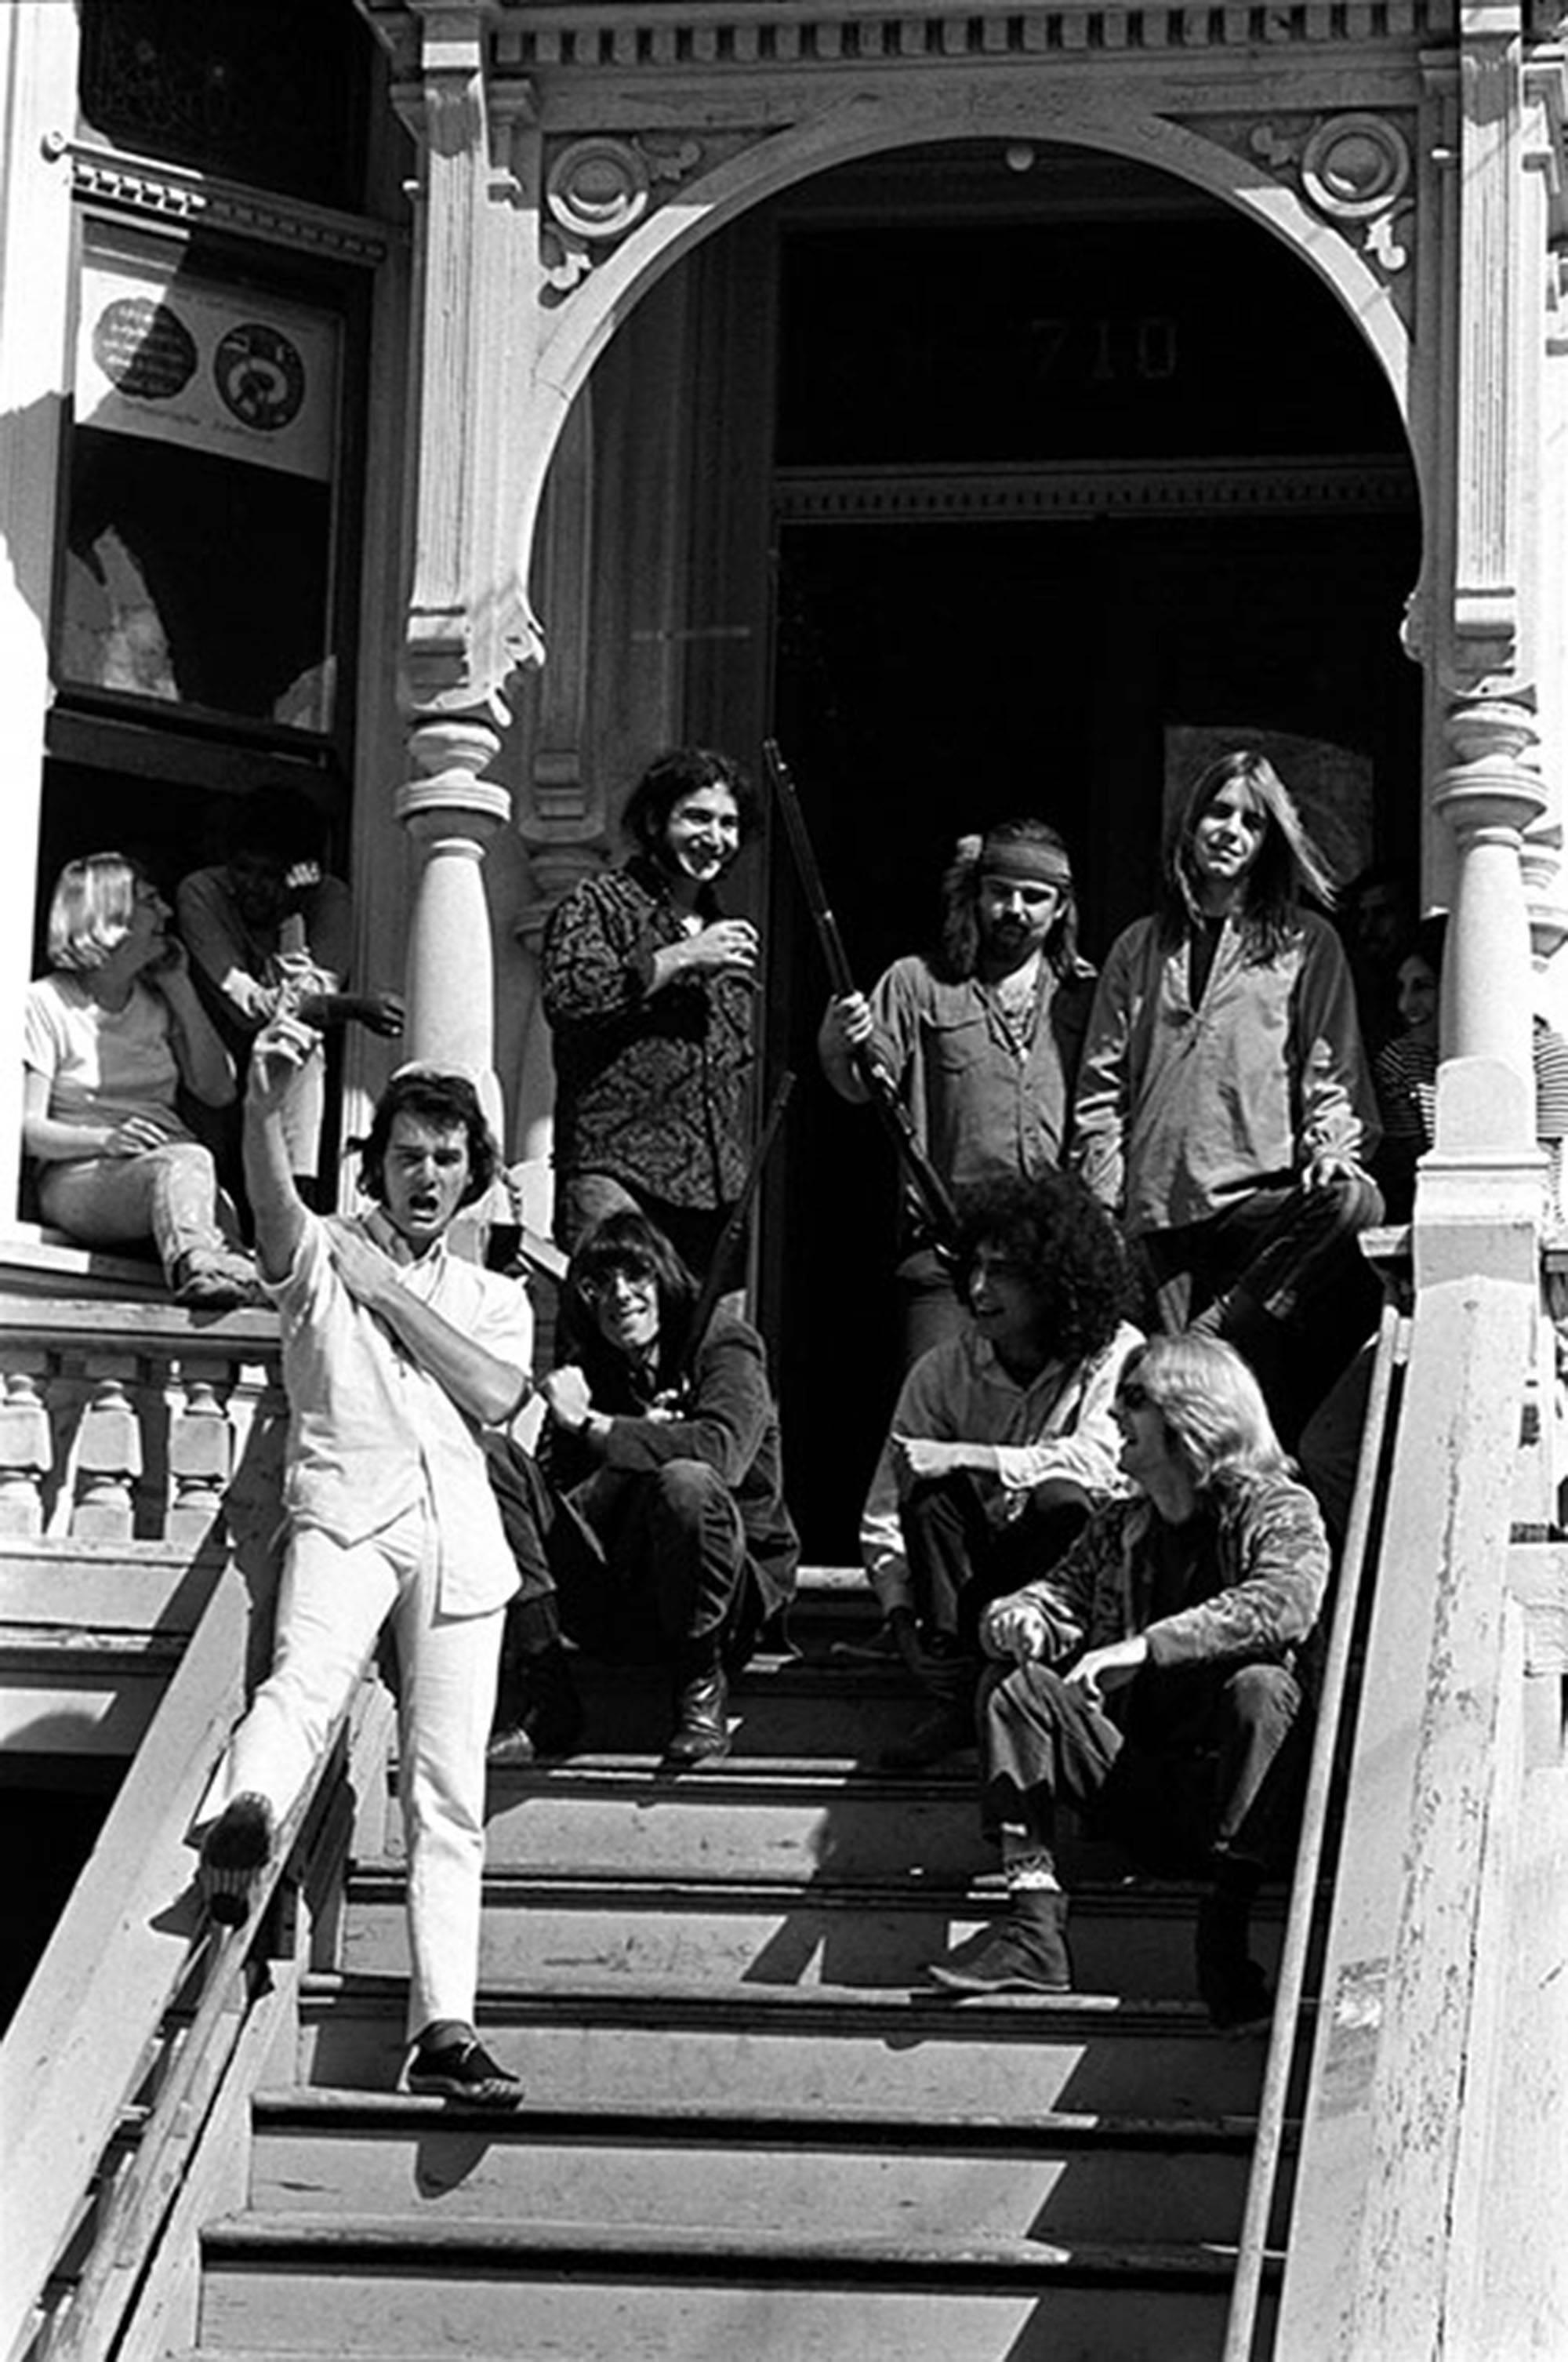 Grateful Dead on the steps - Photograph by Baron Wolman